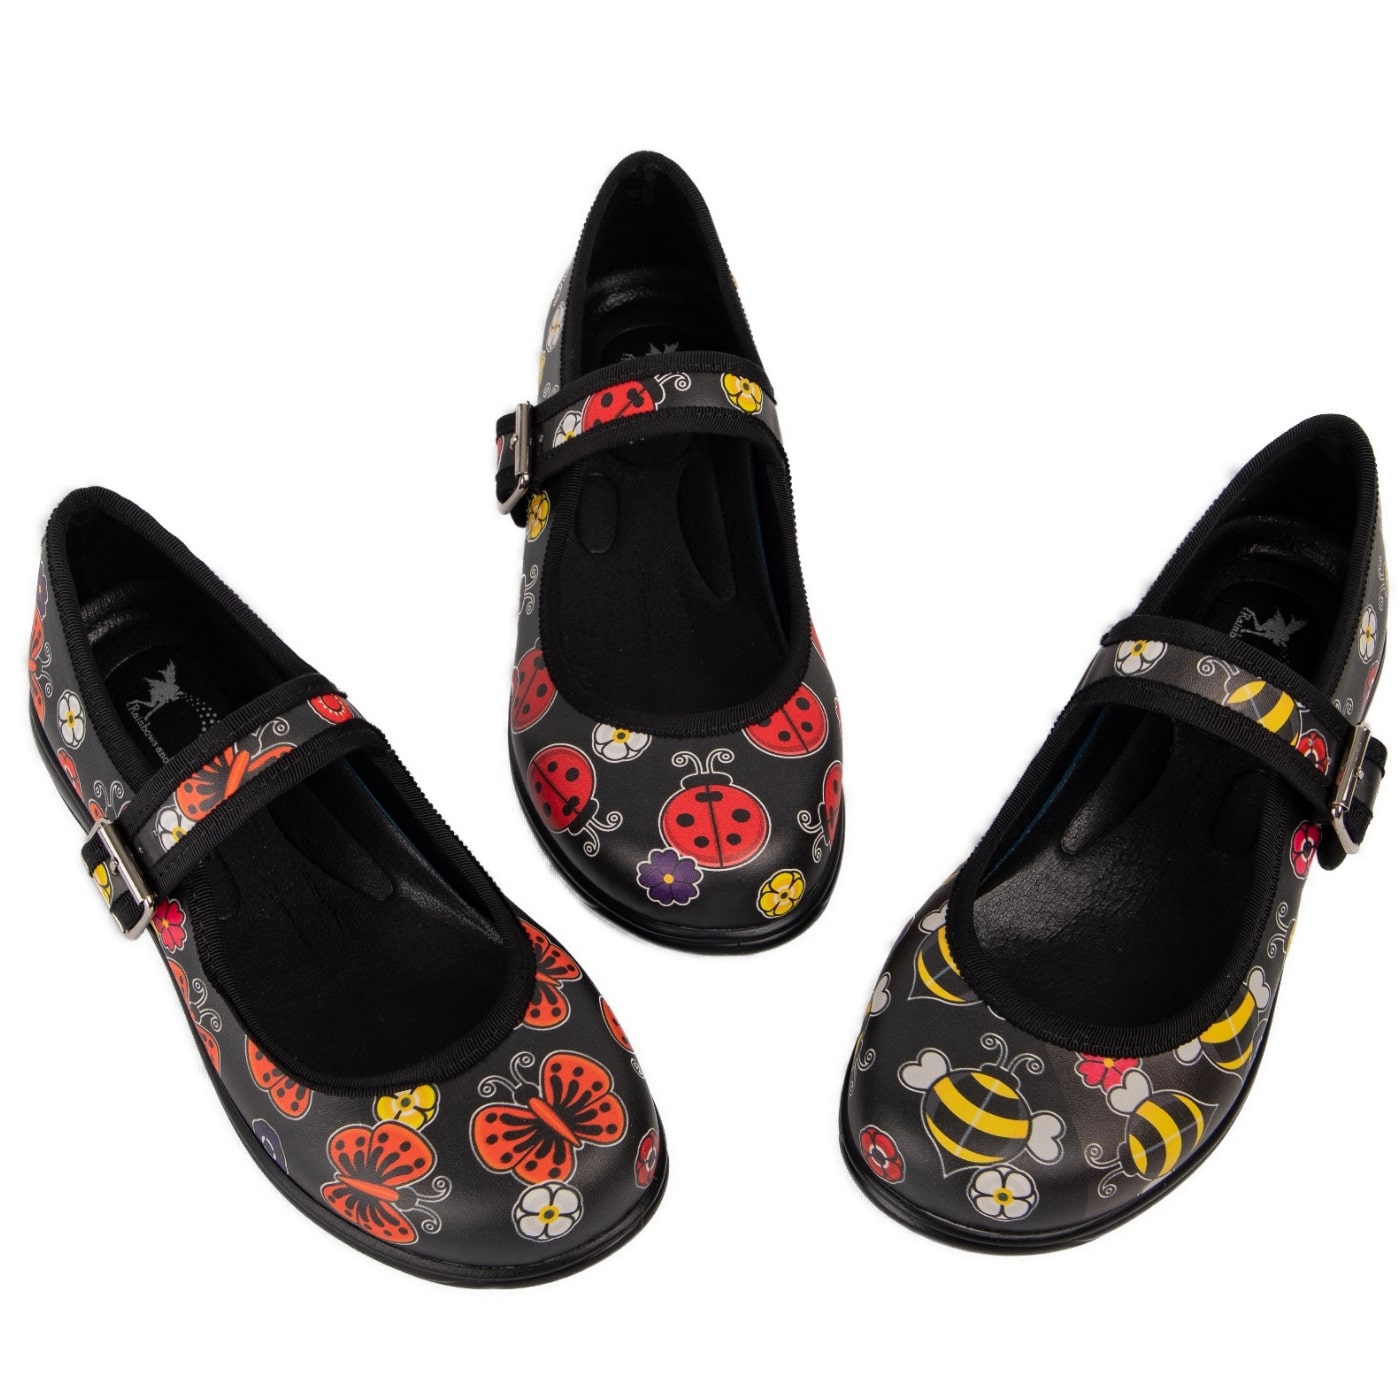 In The Garden Mary Janes by RainbowsAndFairies.com.au (Bees - Ladybug - Butterfly - Mismtached Shoes - Pair & Spare - 3 Shoes - Cute) - SKU: FW_MARYJ_INGARD_ORG - Pic-02